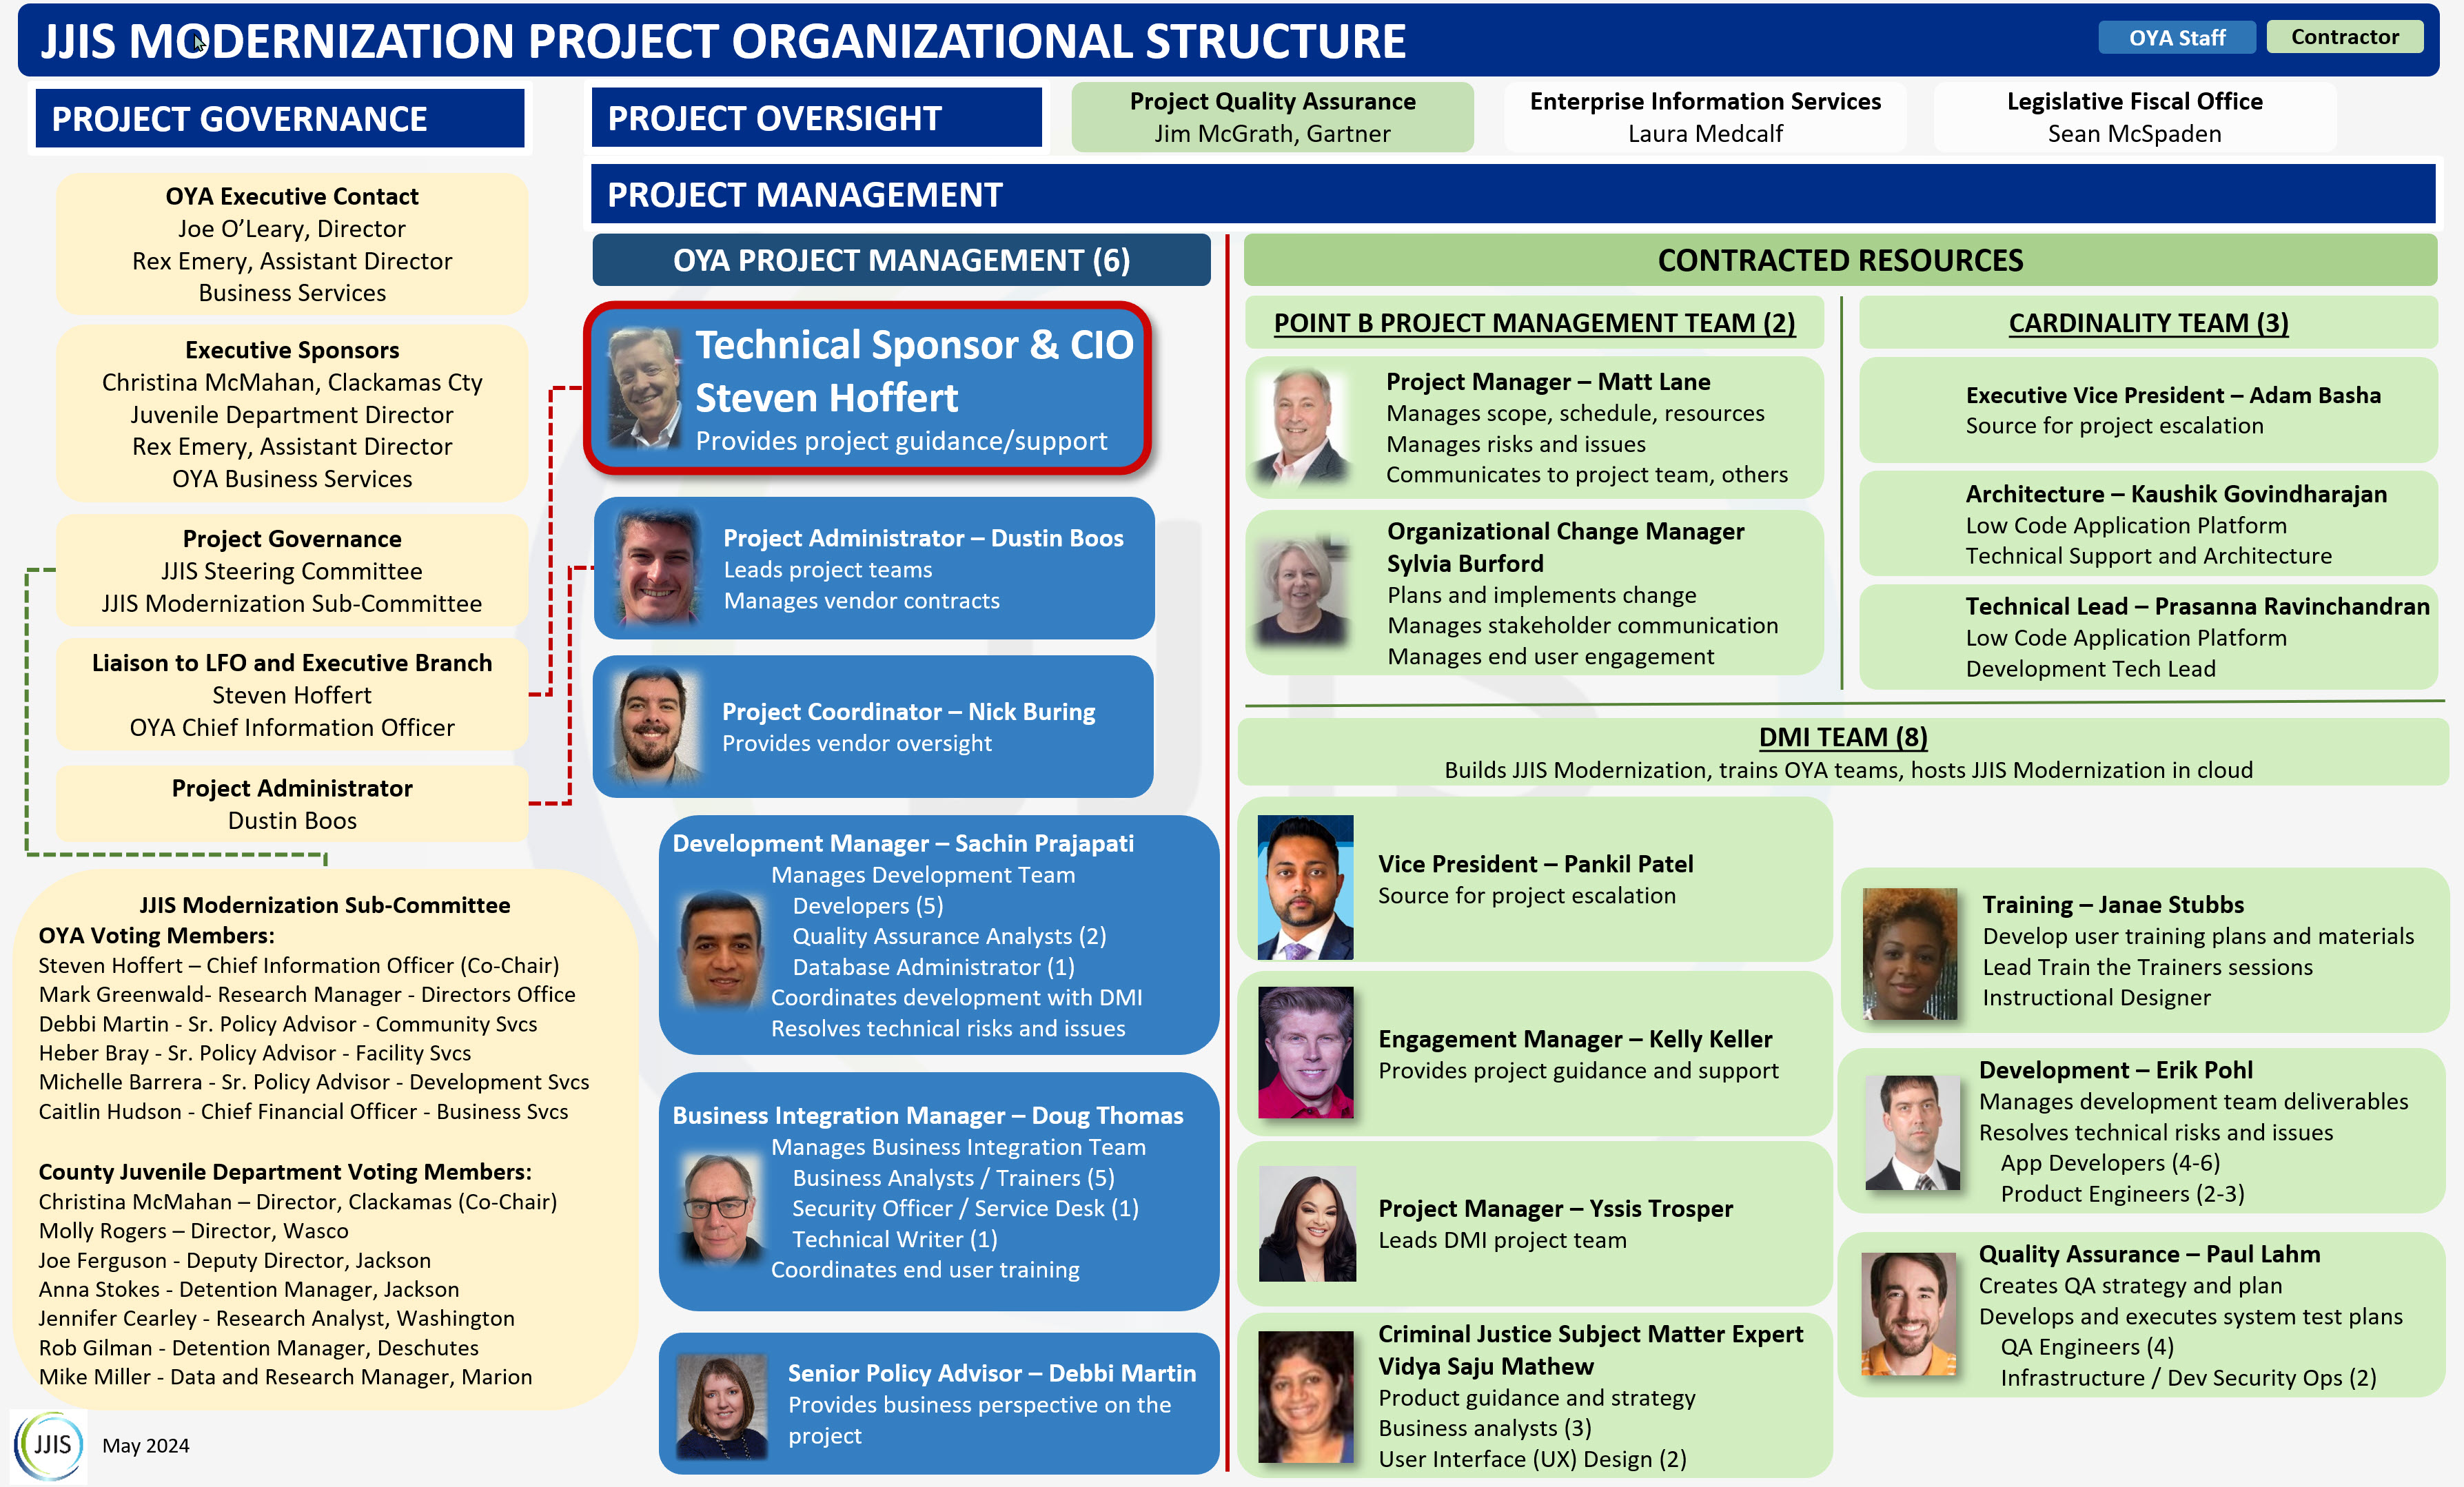 Org chart showing the people involved in the JJIS Modernization project team